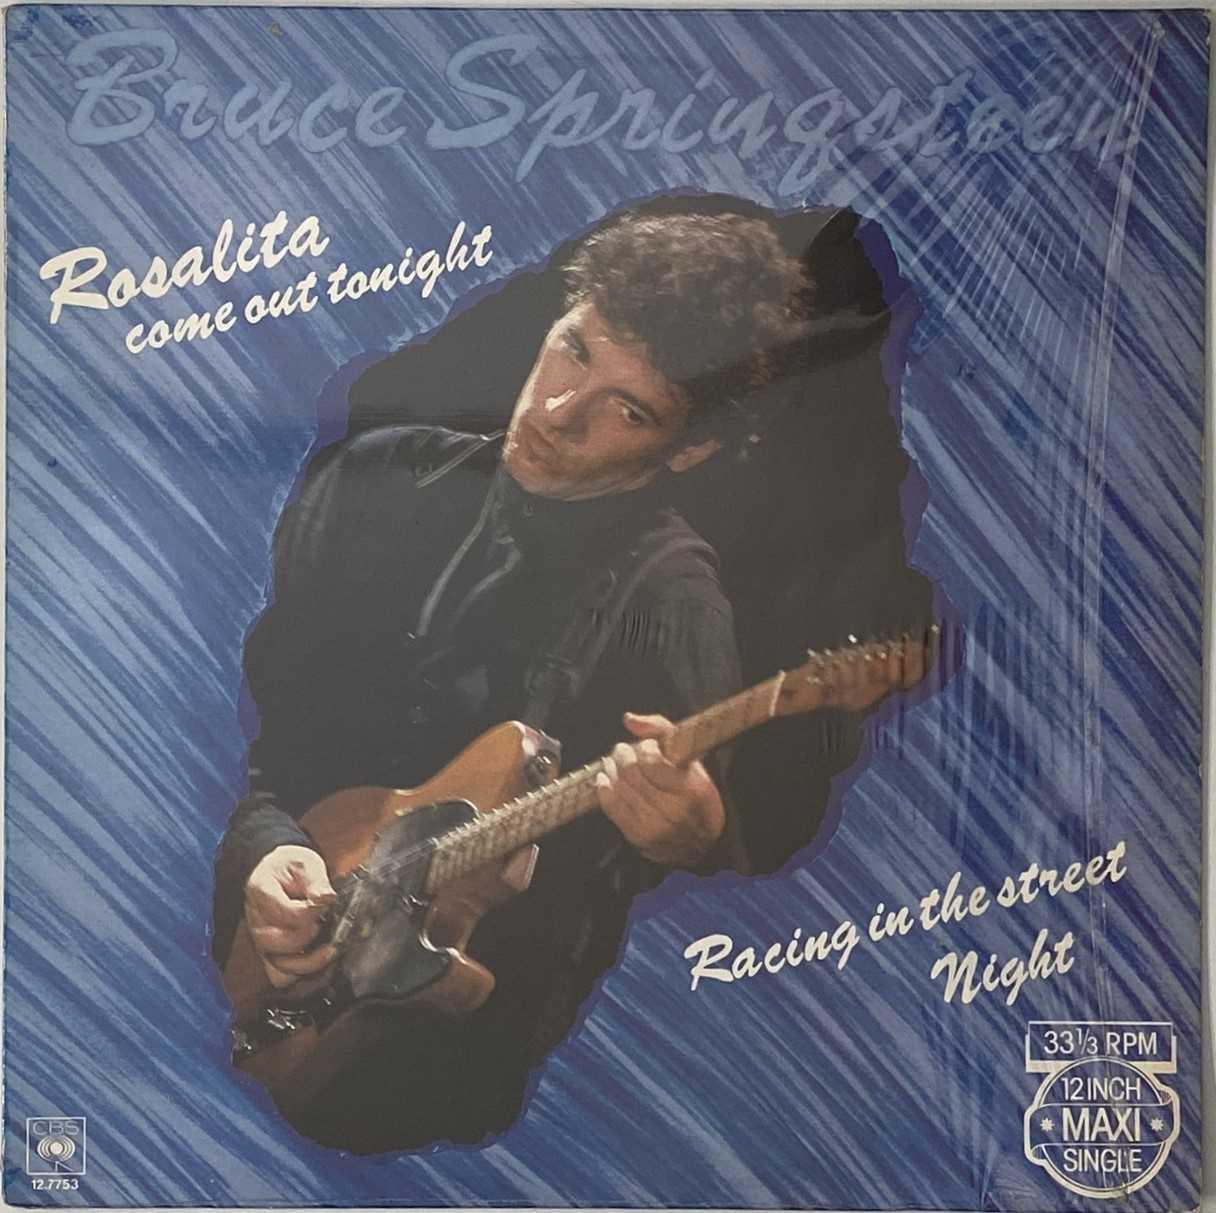 BRUCE SPRINGSTEEN - ROSALITA (COME OUT TONIGHT) 12" MAXI (COMPLETE ORIGINAL EU COPY WITH POSTER - CB